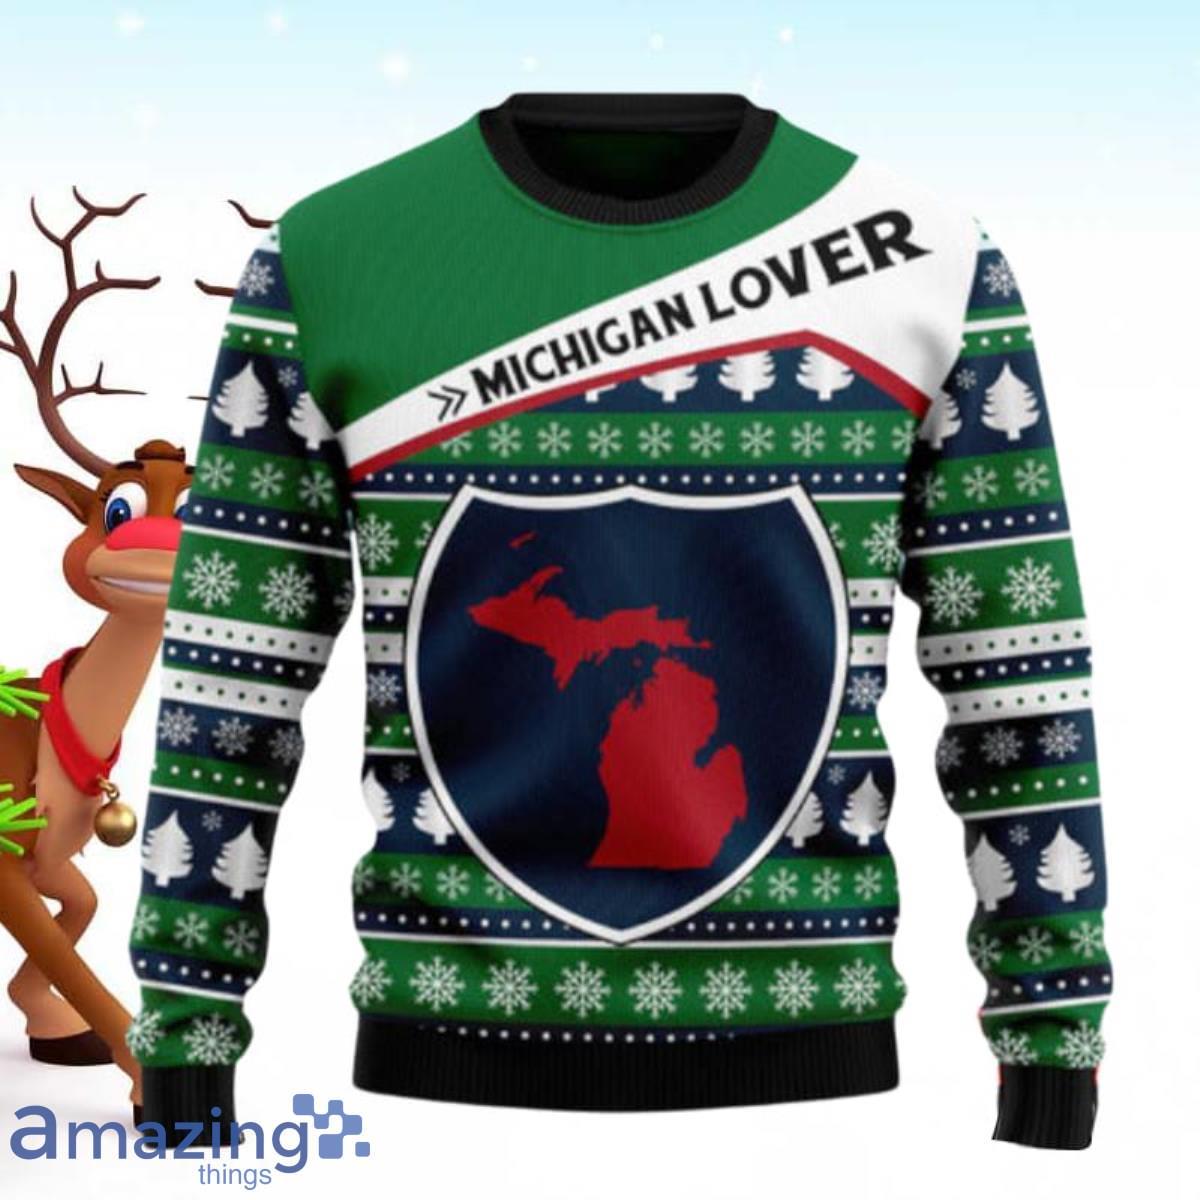 Michigan Lover Ugly Christmas Sweaters Special Gift For Men And Women Product Photo 1